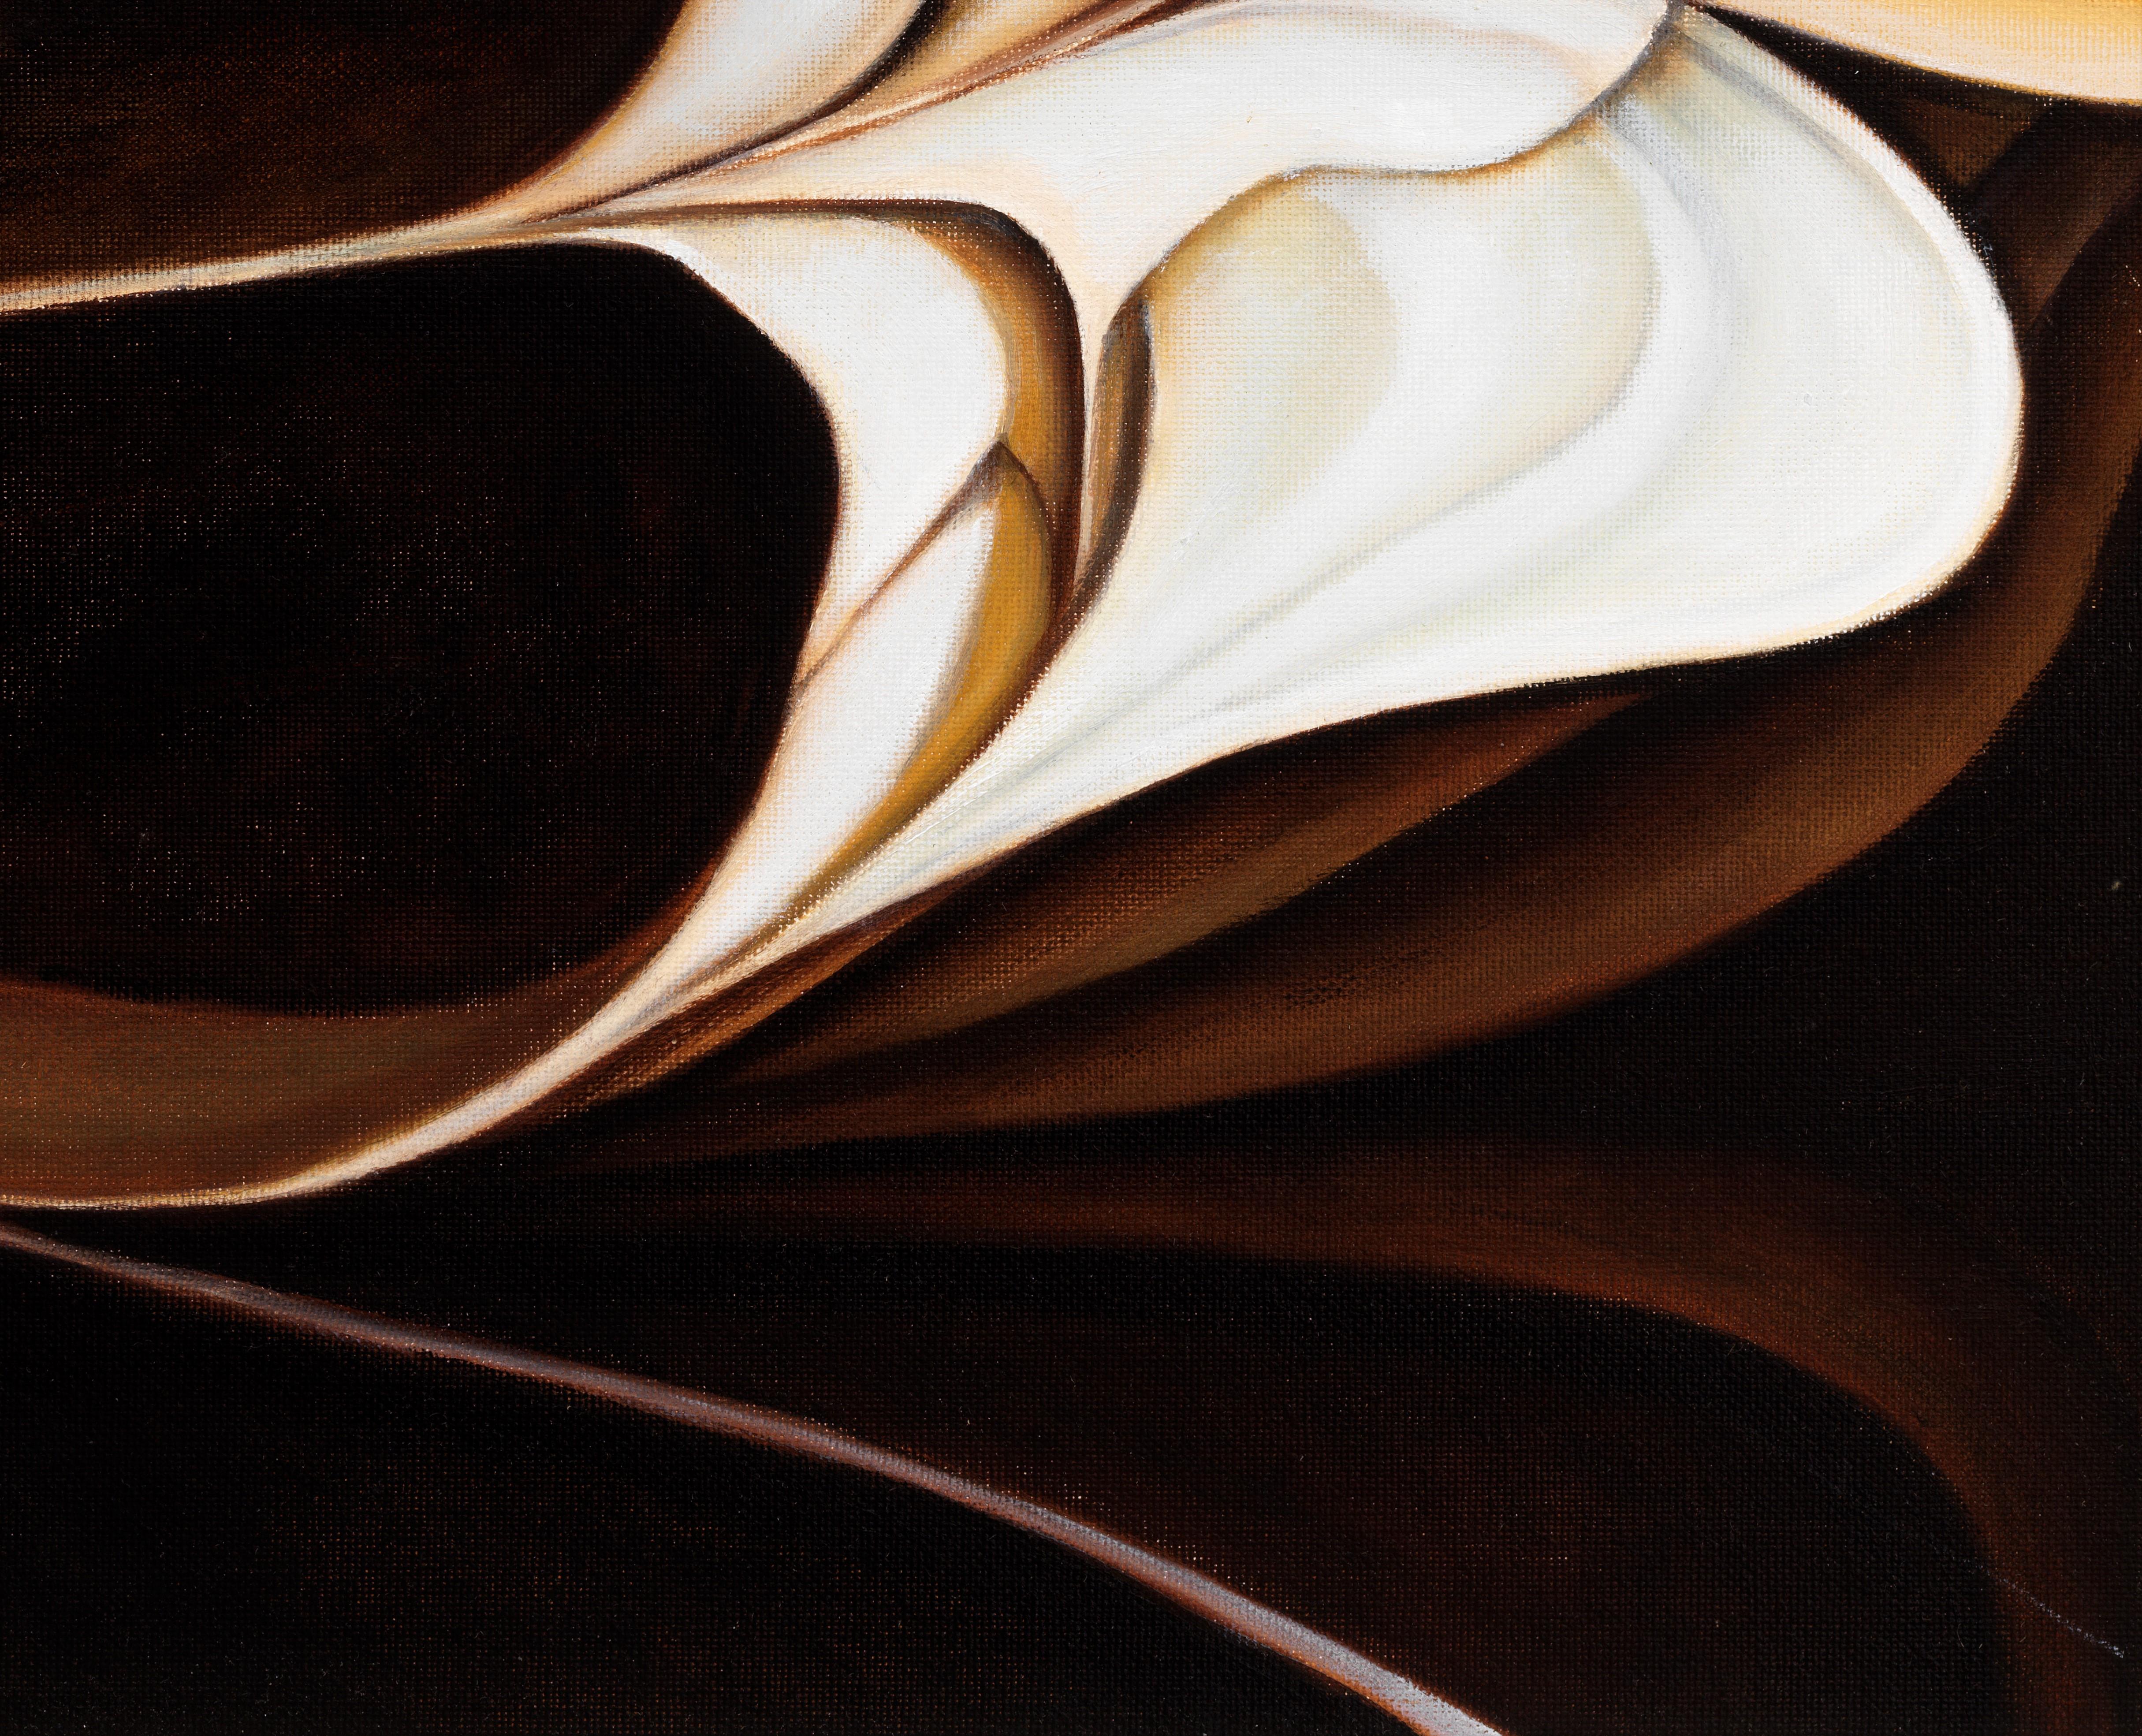 Earth Emergence Original Abstract Oil Painting, Swirling Shades of Brown & White - Black Abstract Painting by Richard Gibbons